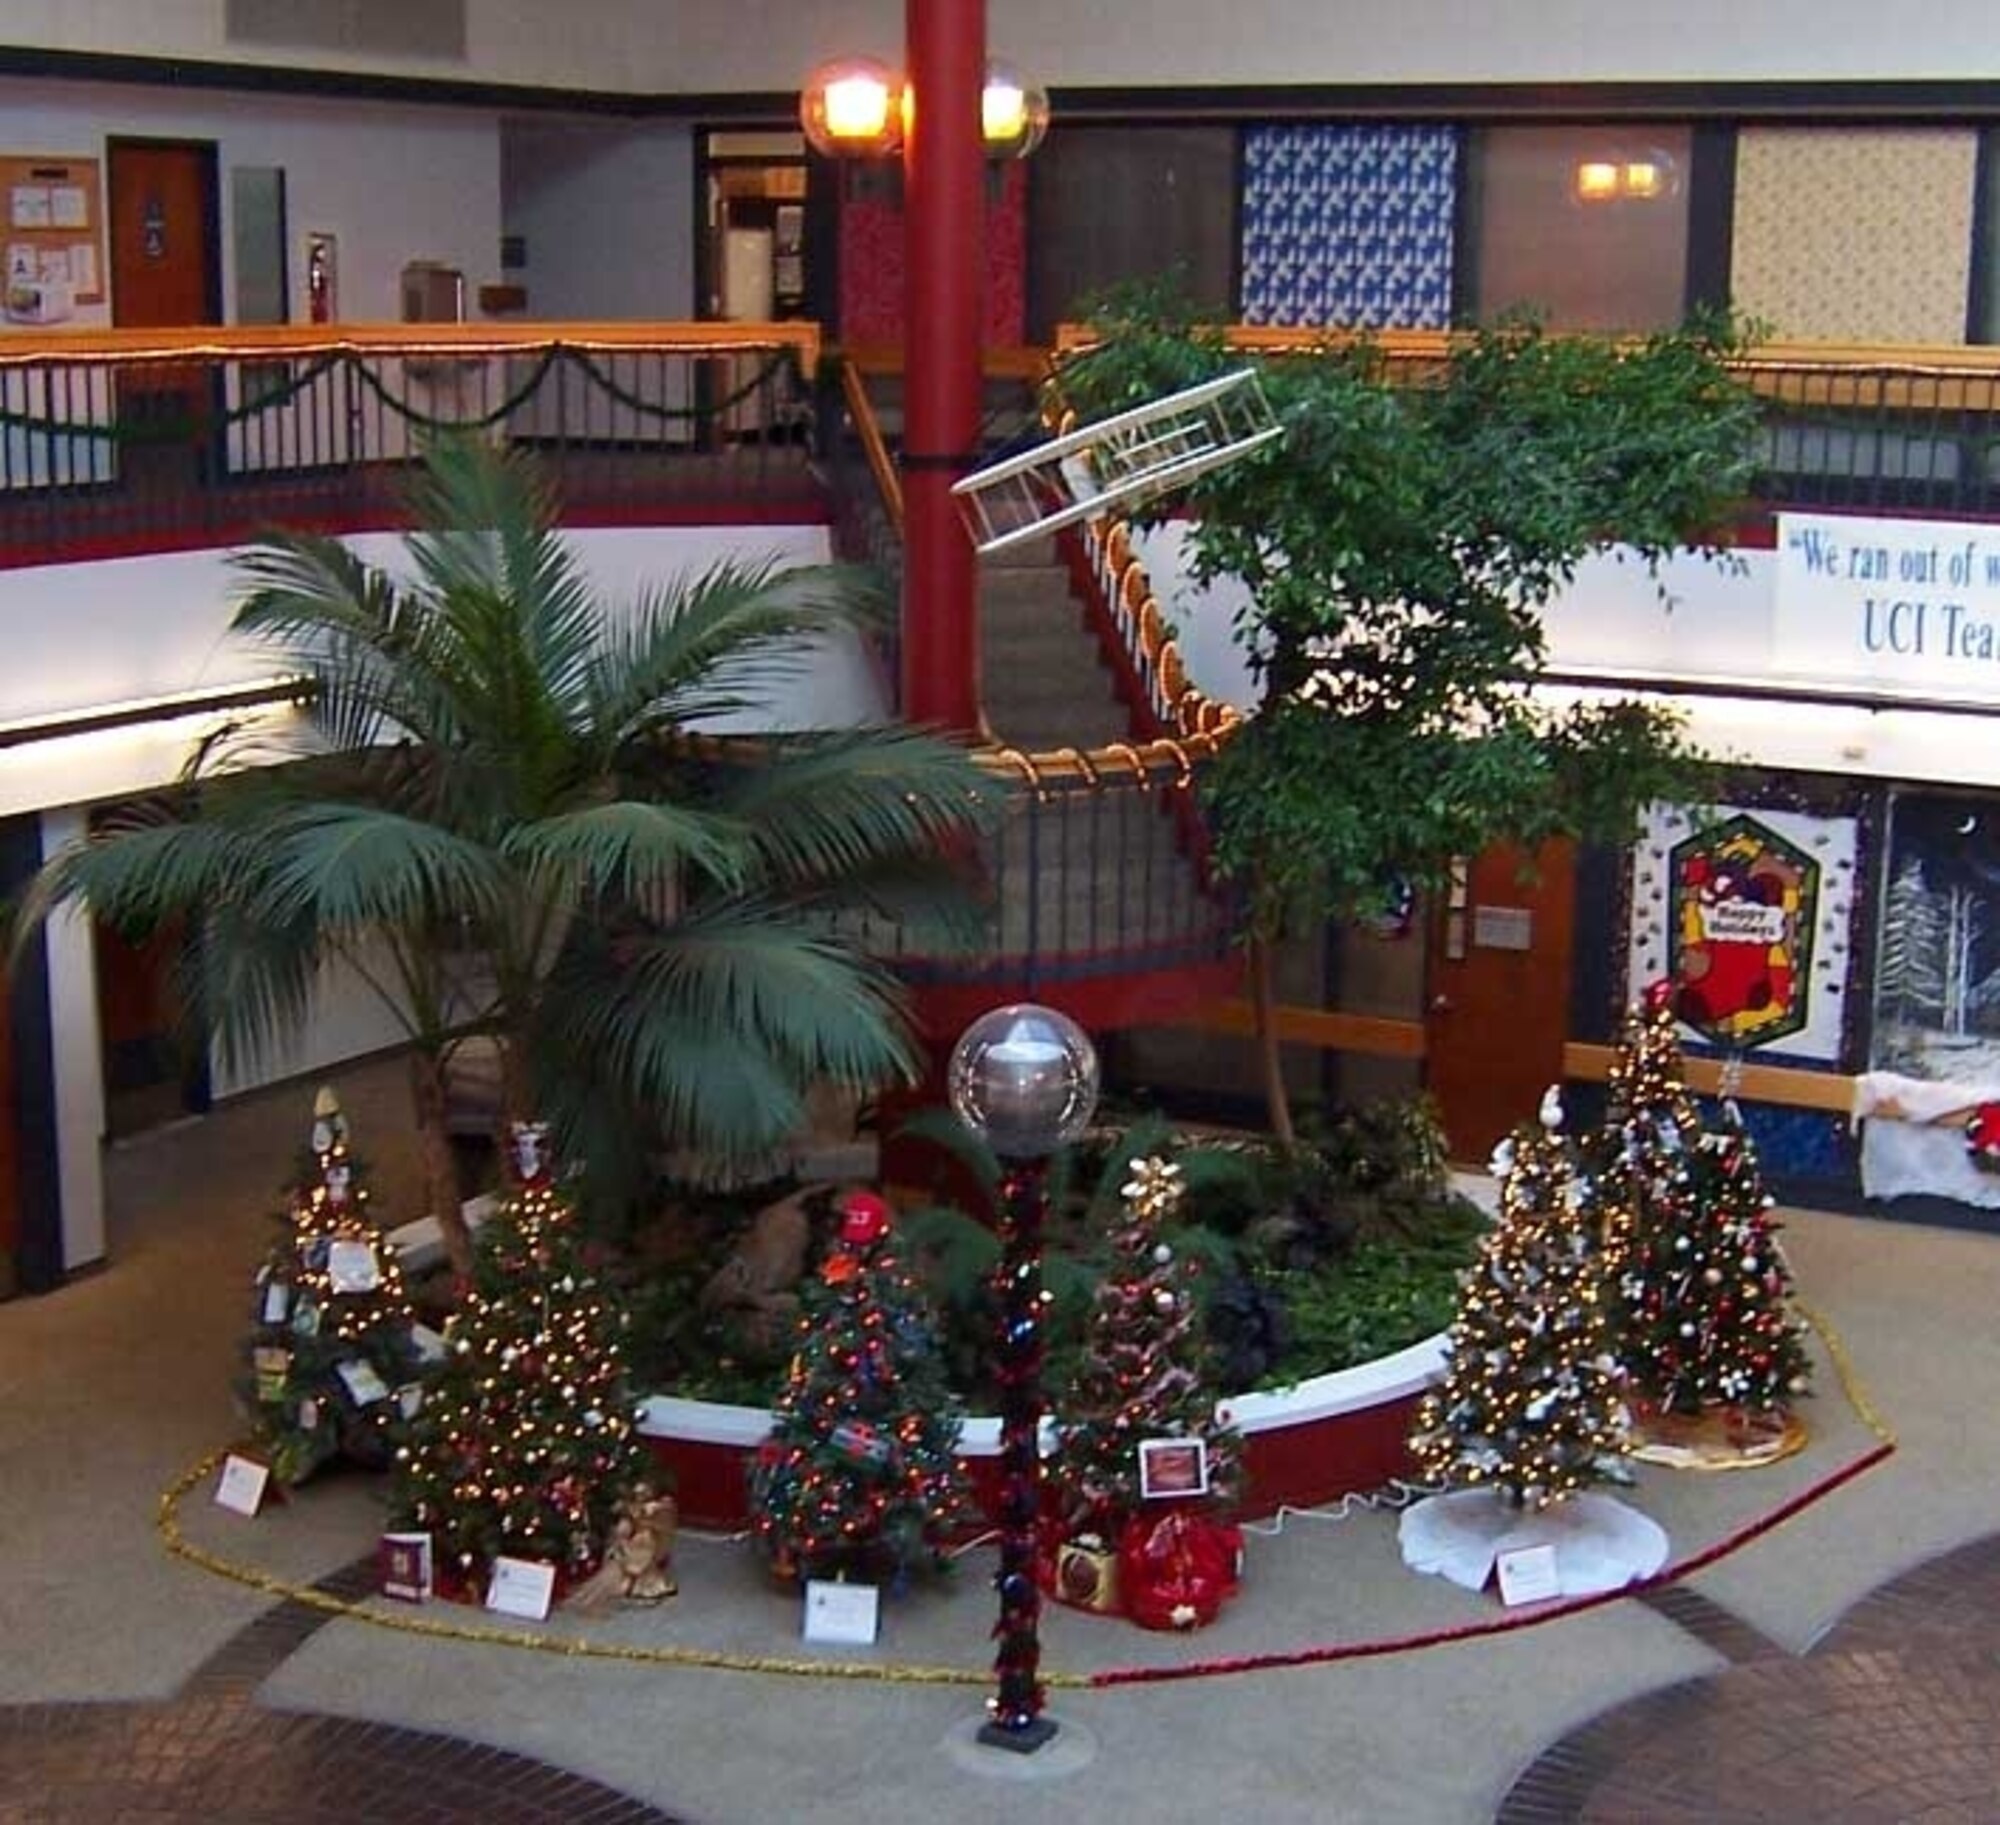 Trees from last year’s Travis Fisher House Holiday Tree Festival and Auction fill the atrium in Bldg. 31. This year more than 20 trees and numerous gift baskets have been purchased for auction, with all proceeds benefiting the Travis Fisher House. This year’s festival is 4 to 7 p.m., Nov. 29 in Bldg. 31. Santa will be on hand to take photos with children and there will be entertainment provided. A non-perishable food item is required for entrance. (U.S. Air Force photo/Senior Airman Shaun Emery)